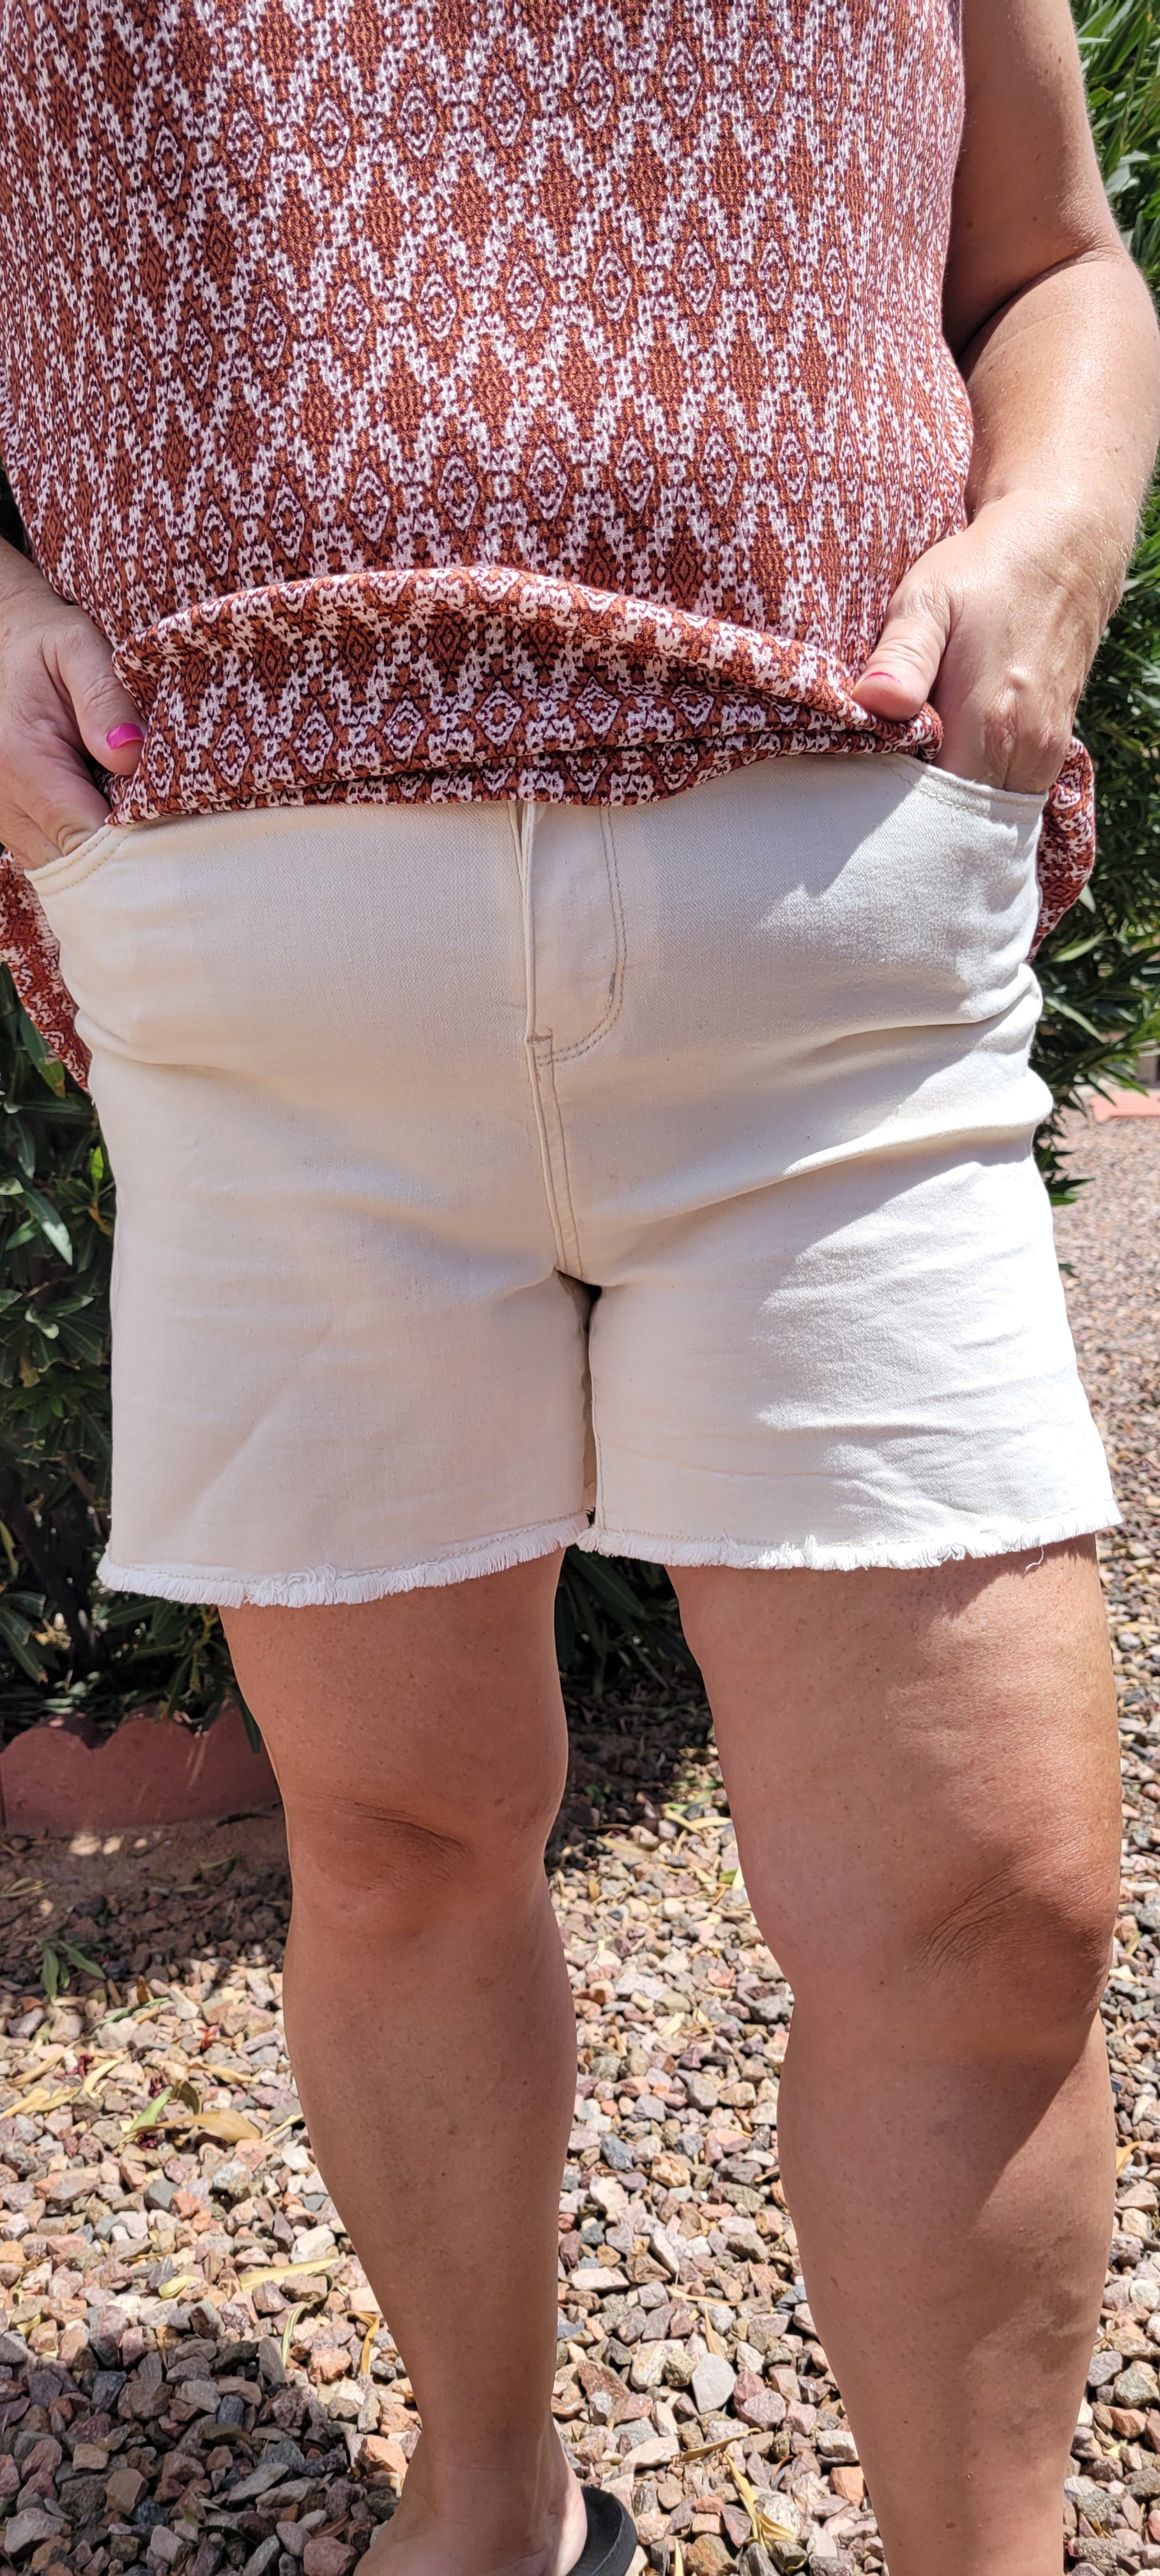 These are cream colored, high waist, non-distressed shorts featuring a frayed hemline, functional pockets in the front and back. These shorts are stretchy for comfort.  A great staple piece for your wardrobe. Size large.